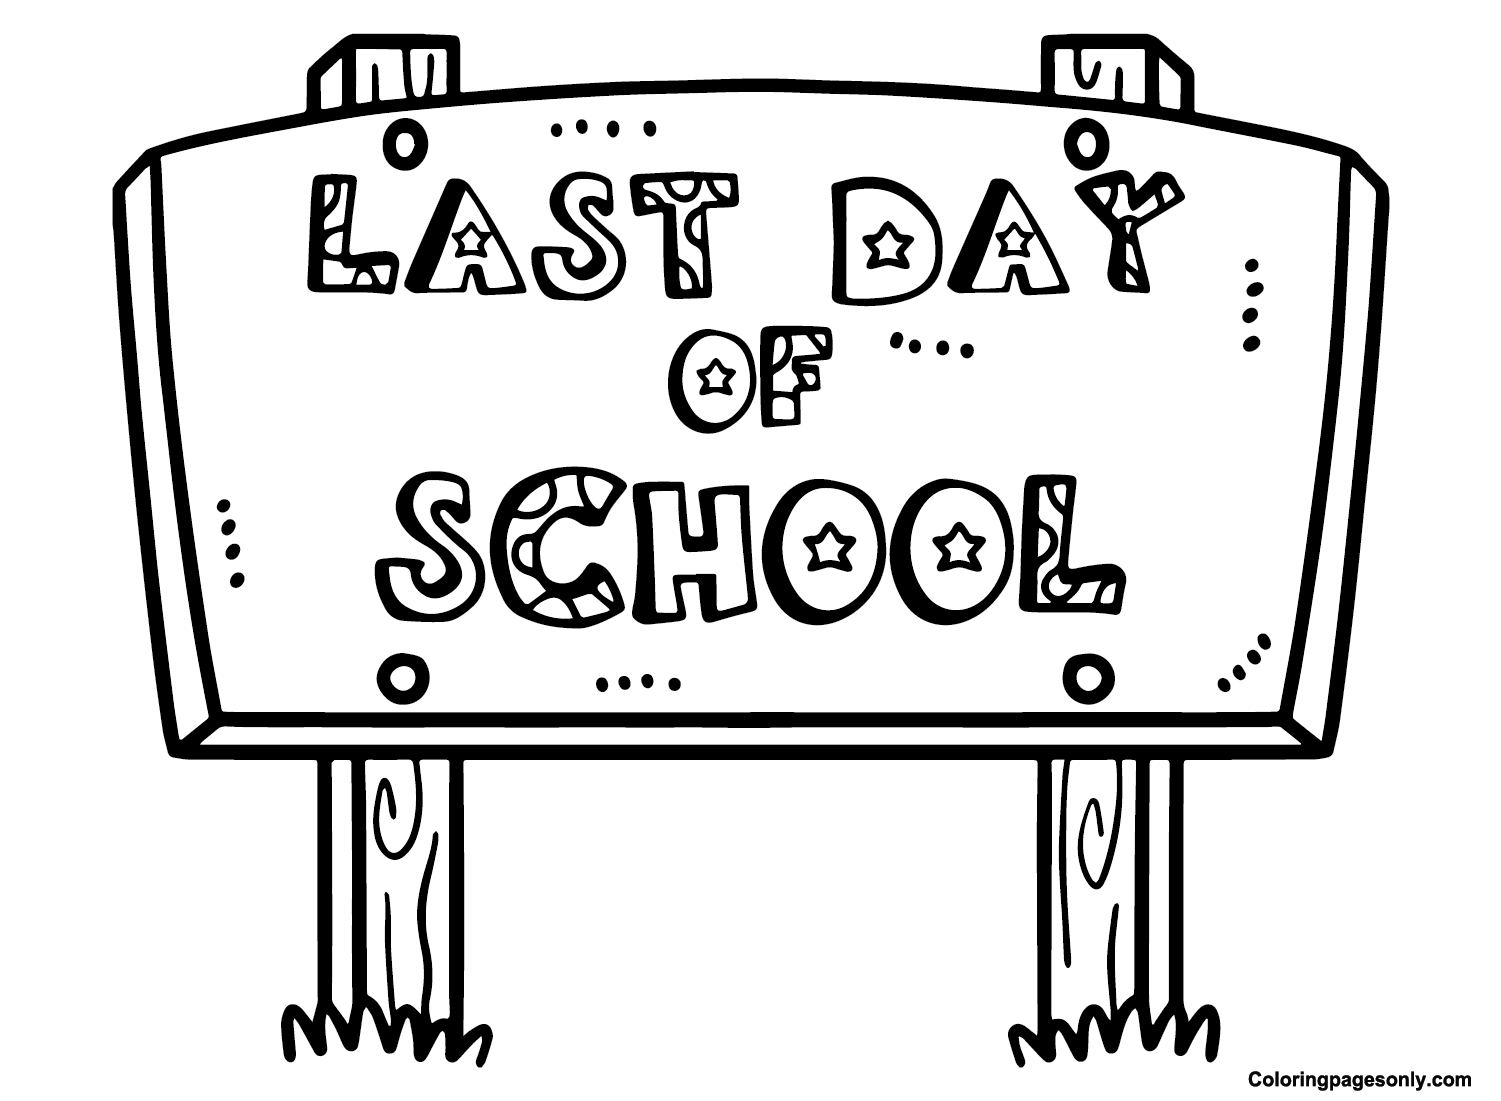 last-day-of-school-for-children-coloring-pages-last-day-of-school-coloring-pages-coloring